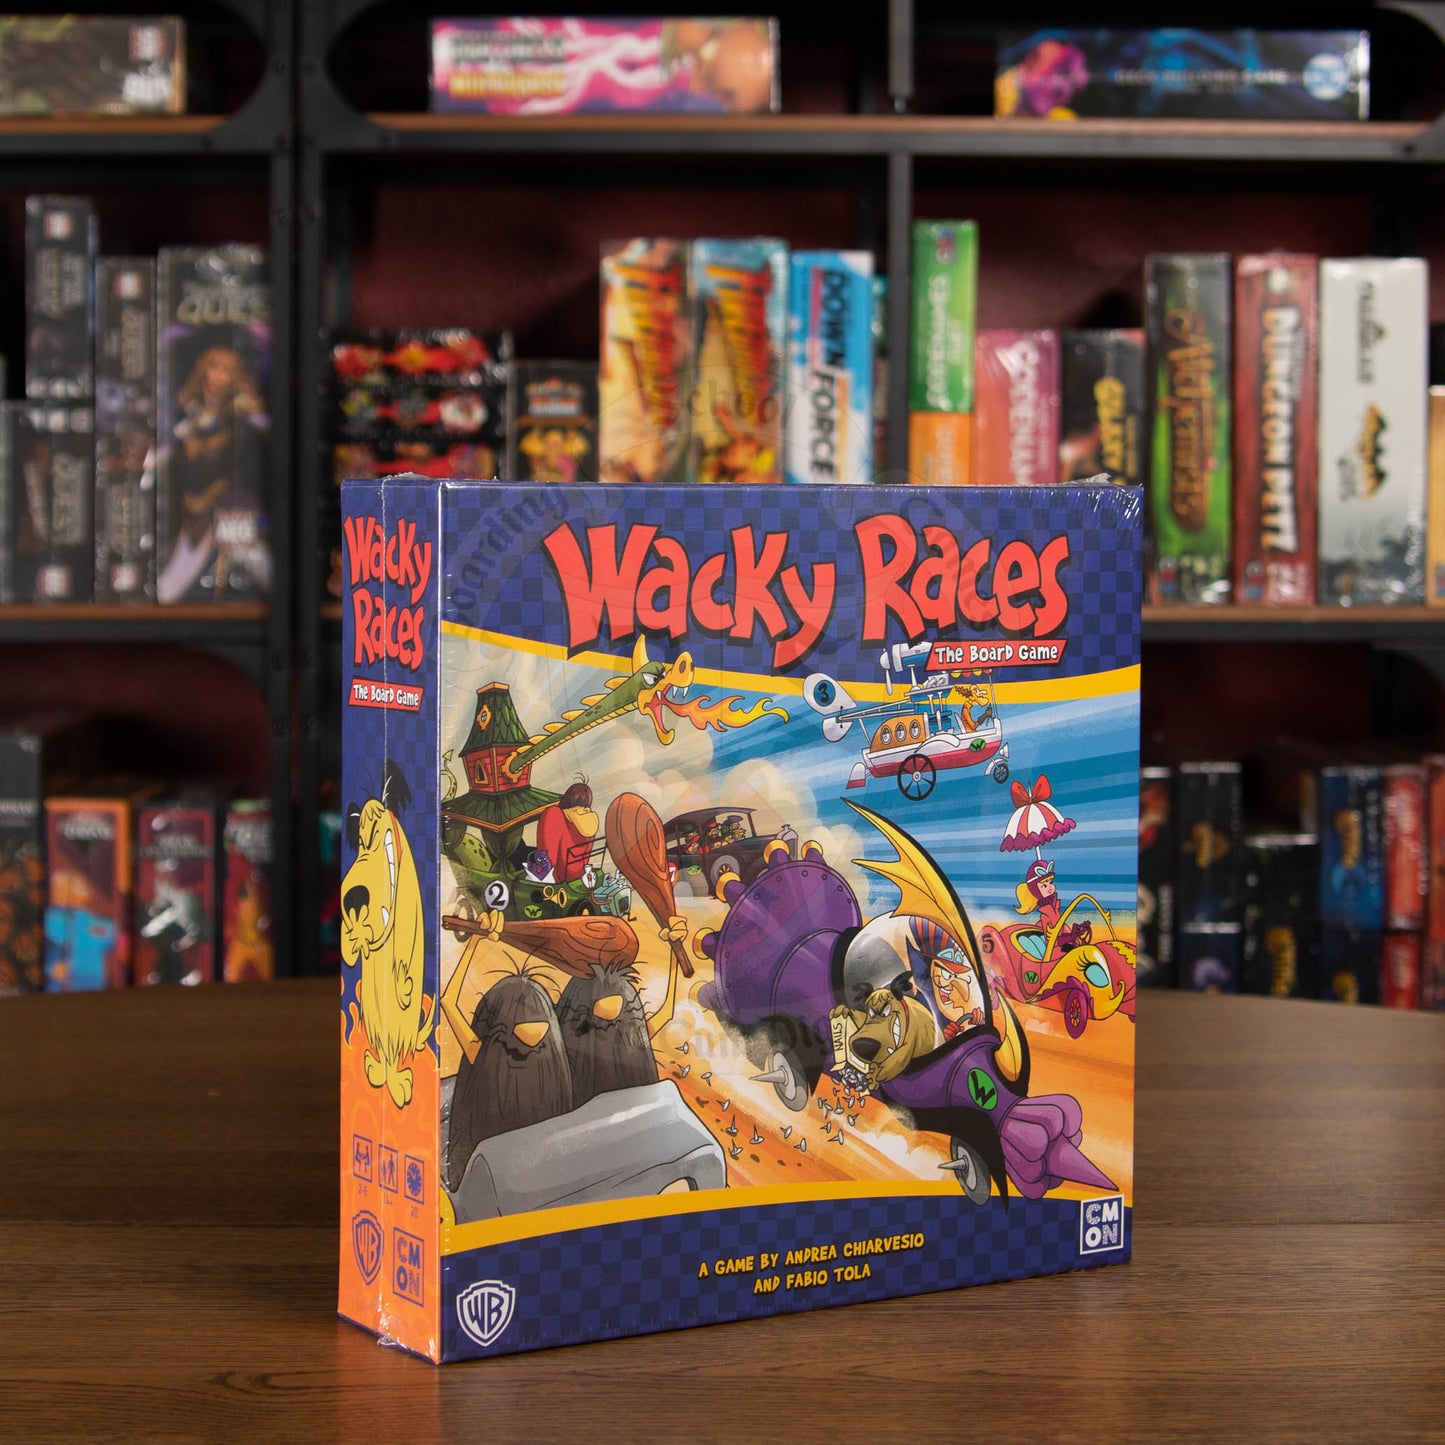 (BSG Certified USED) Wacky Races: The Board Game